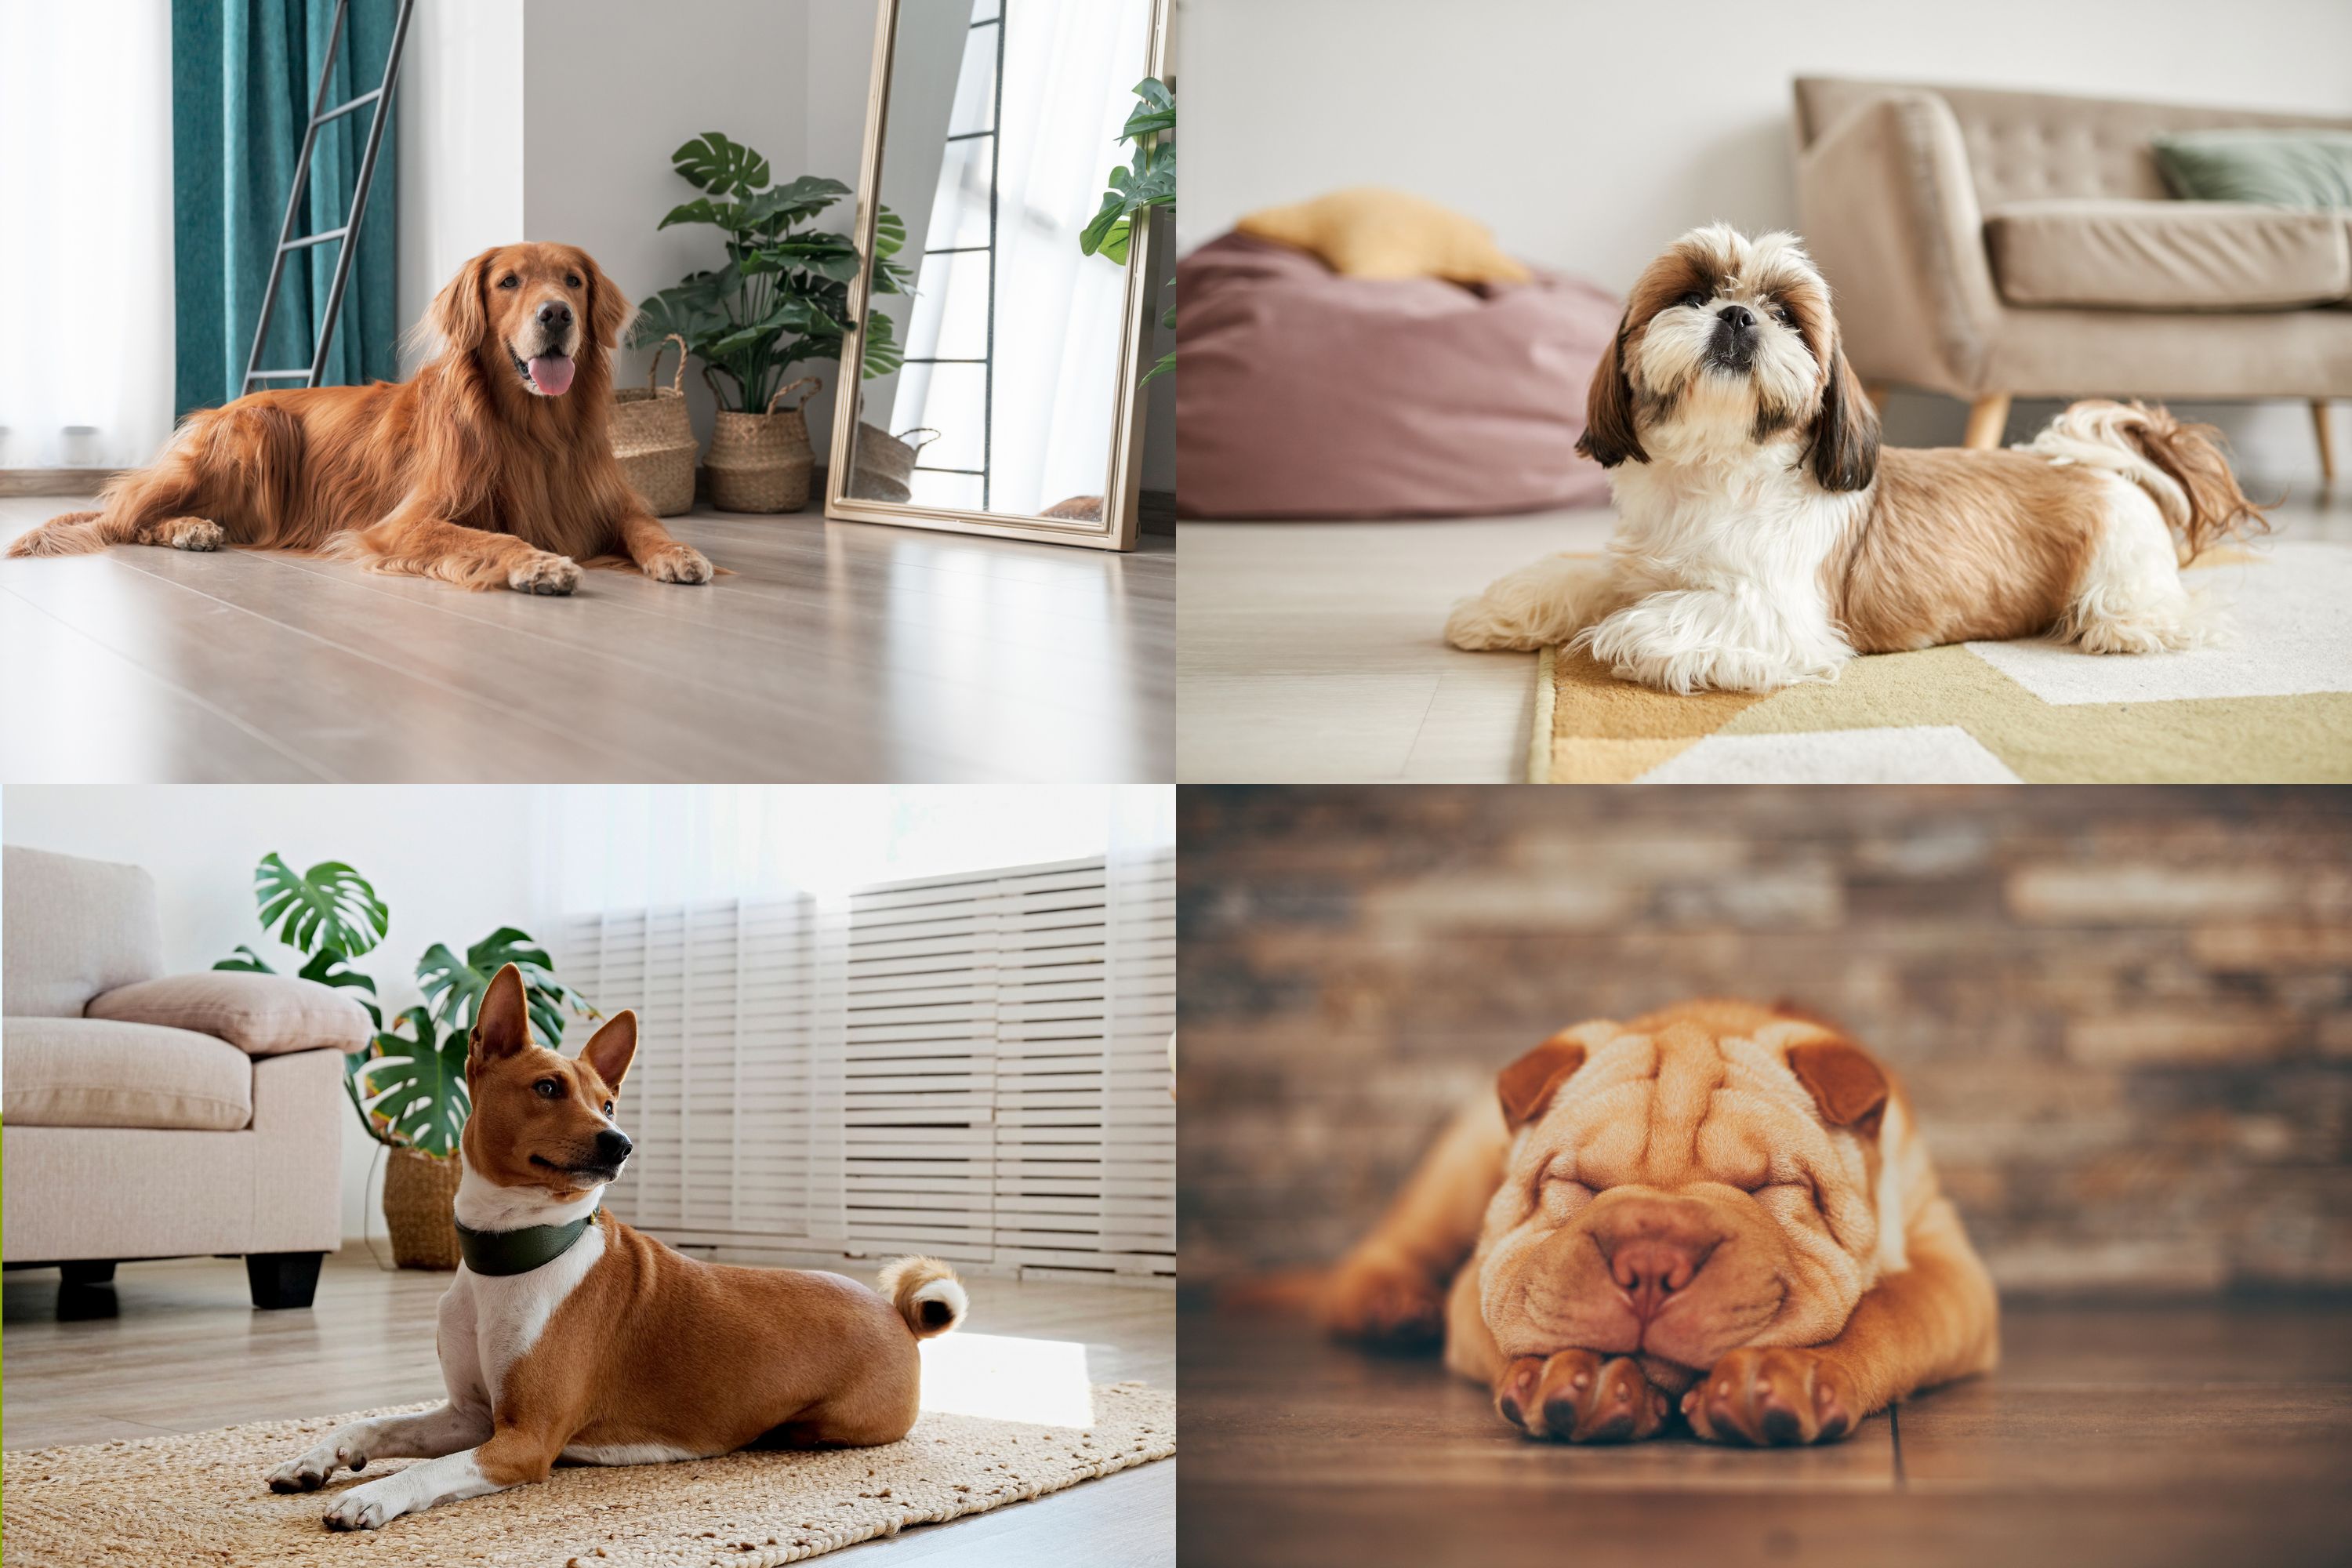 The 20 best dog breeds for apartment living